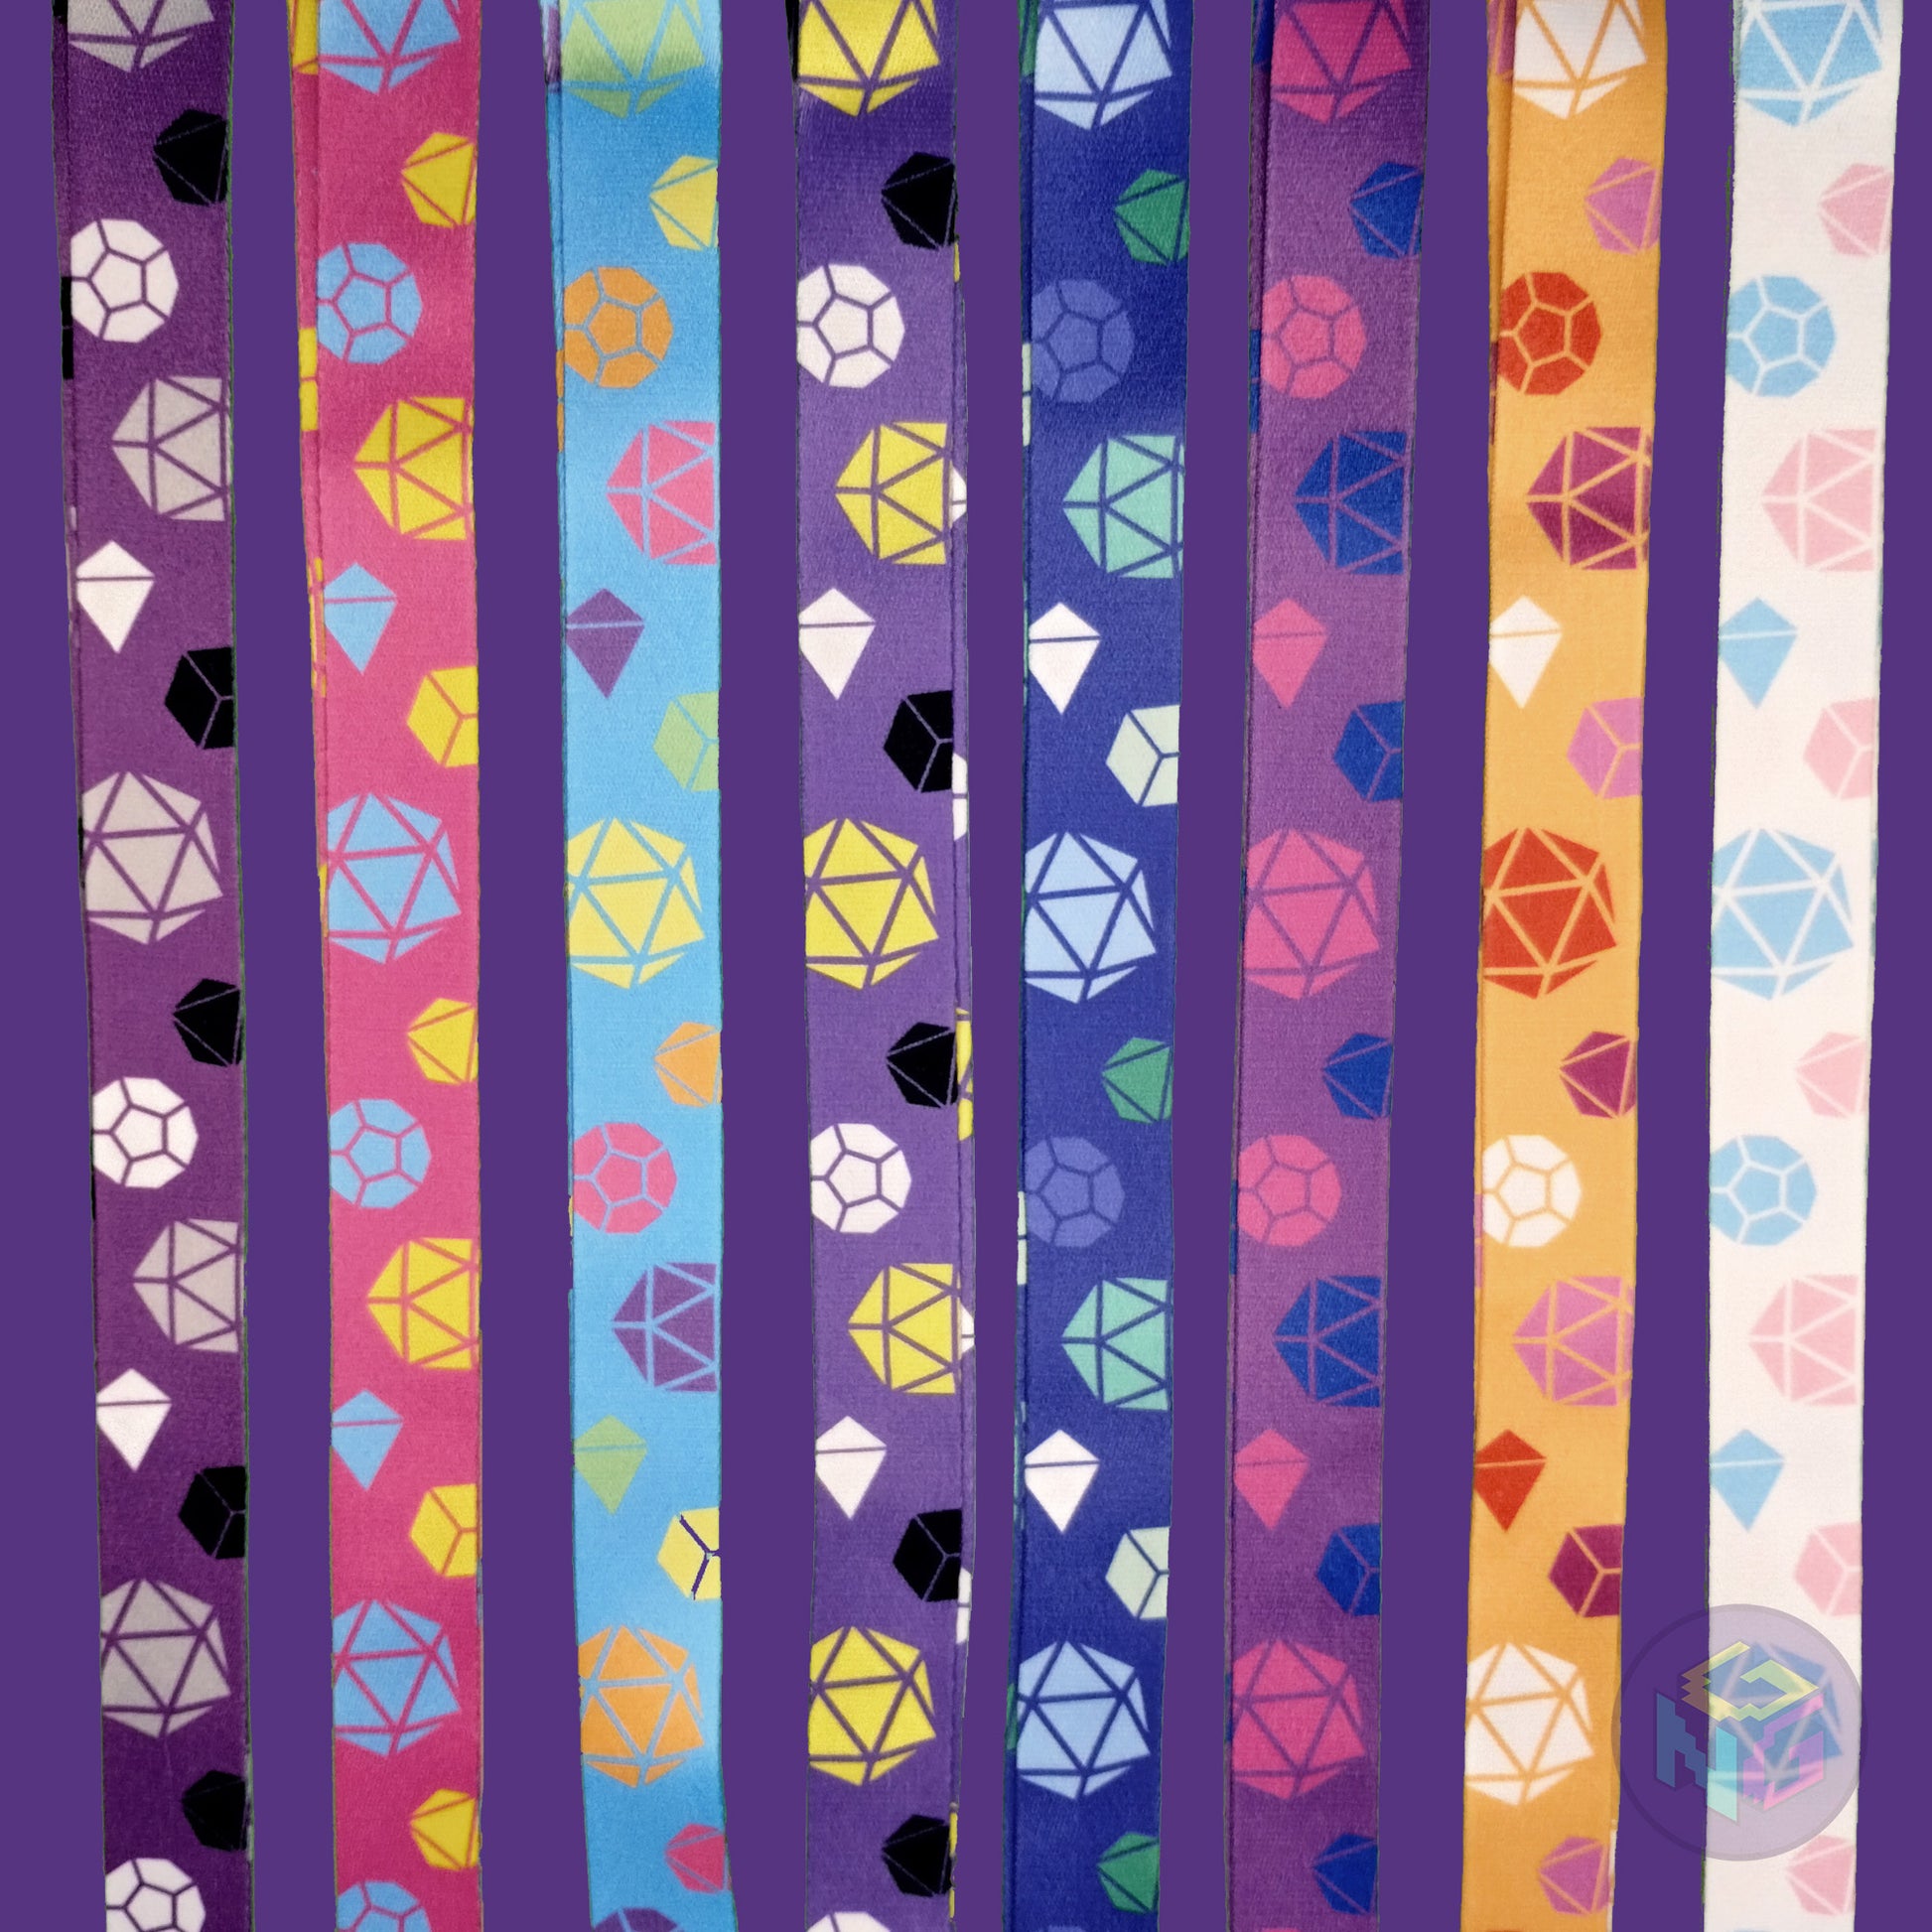 group shot of all eight of the pride dice lanyards showing the options for asexual, pansexual, rainbow, nonbinary, gay, bisexual, lesbian, and transgender